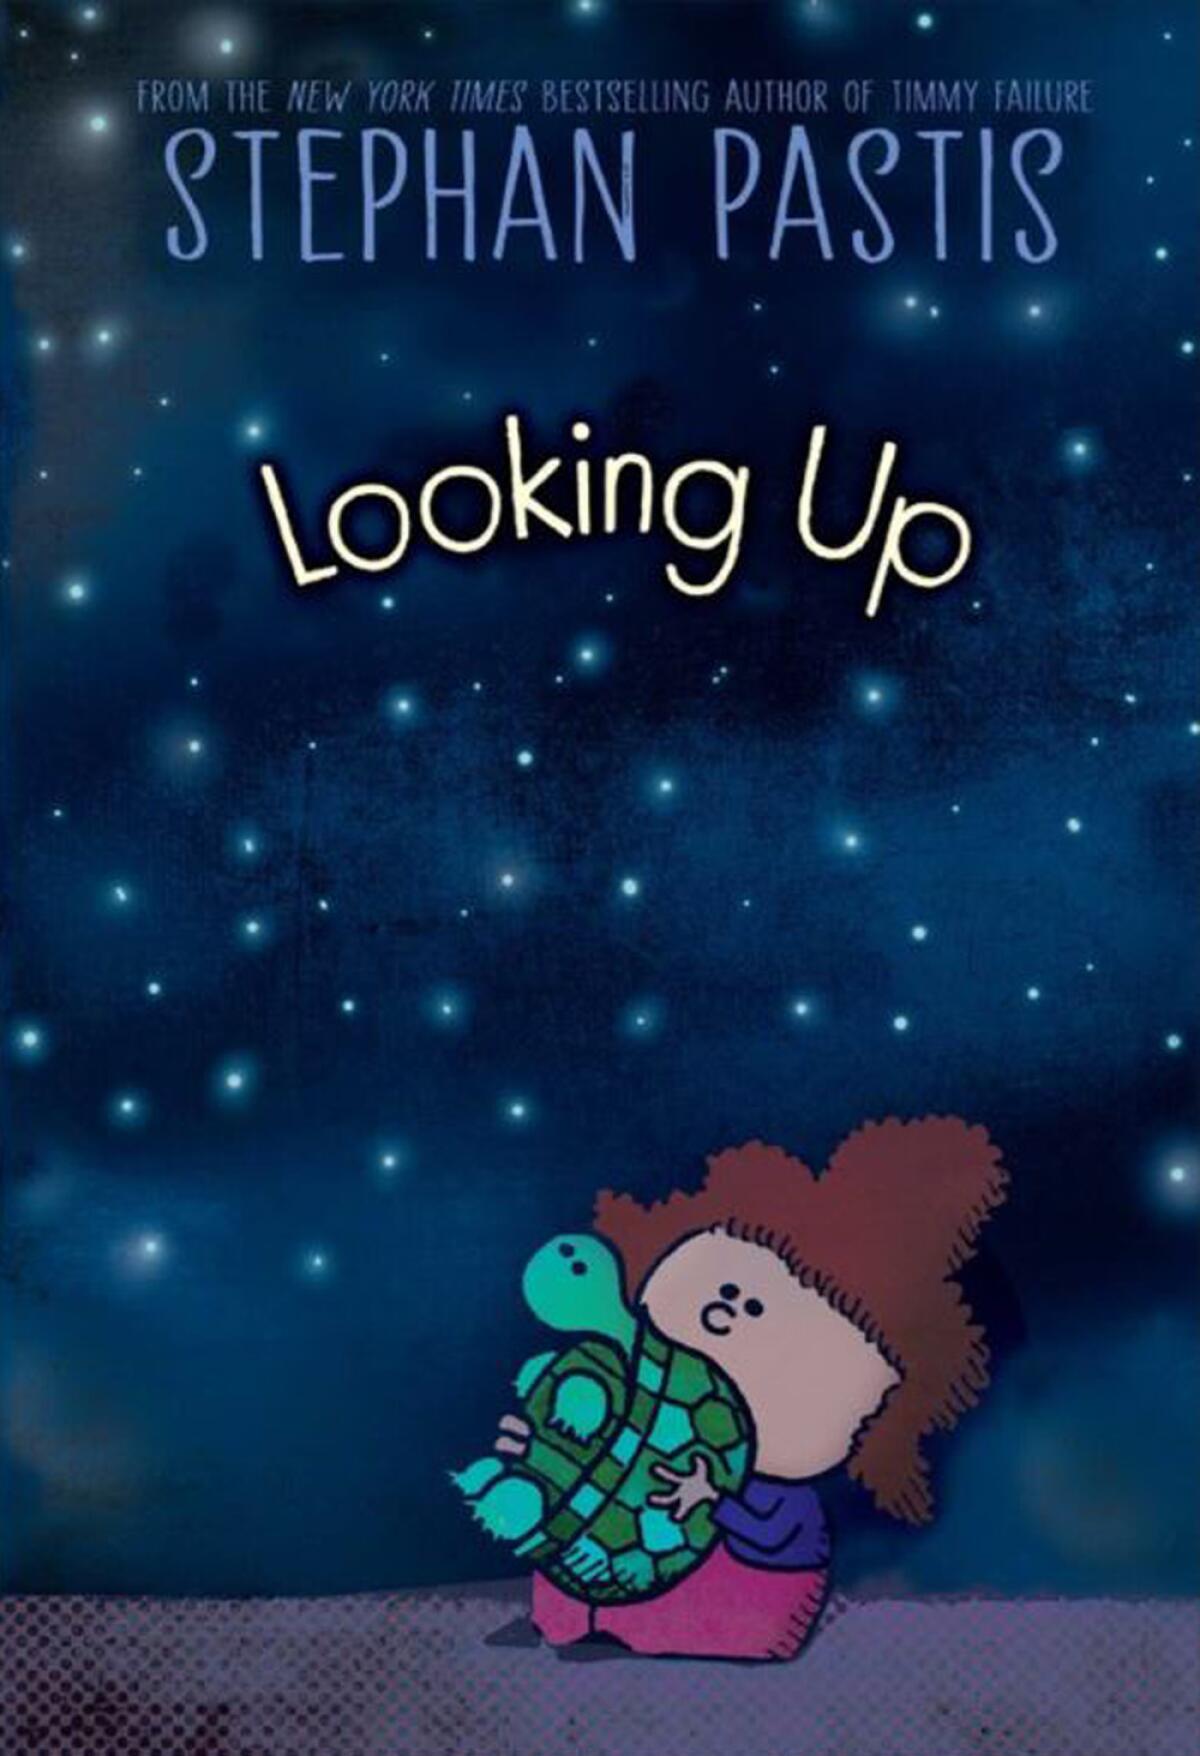 The book jacket for Stephan Pastis' children's book "Looking Up."